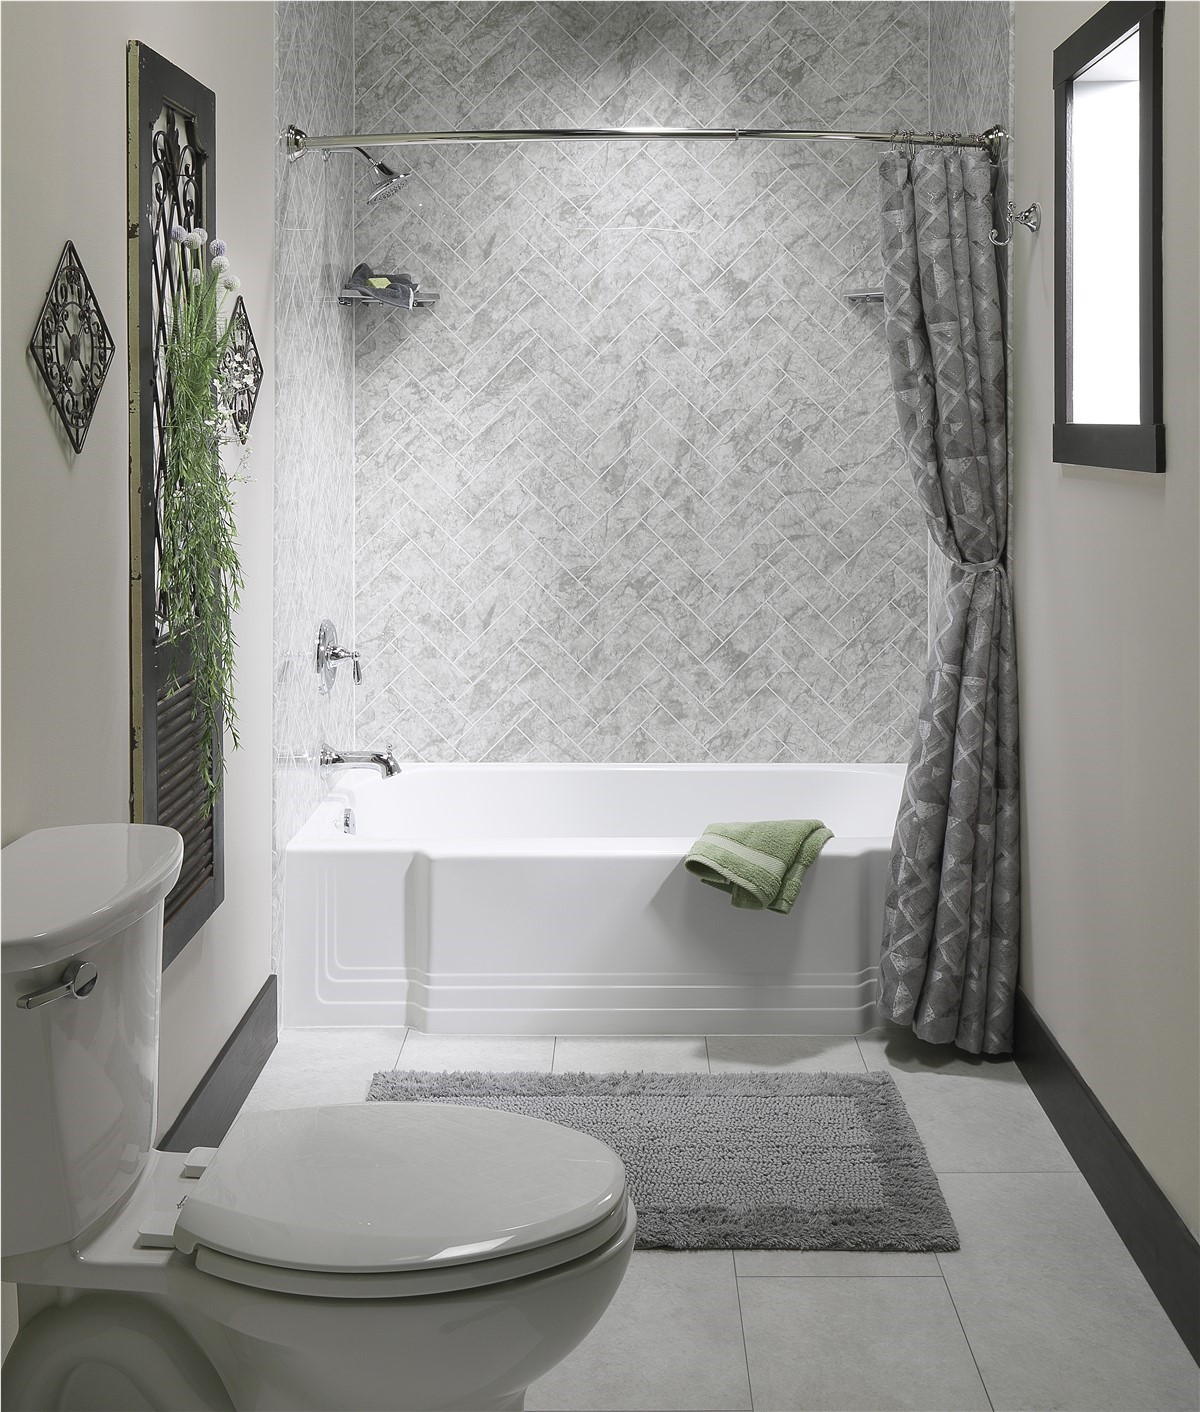 Bathtub and Shower Solutions for Small Bathrooms